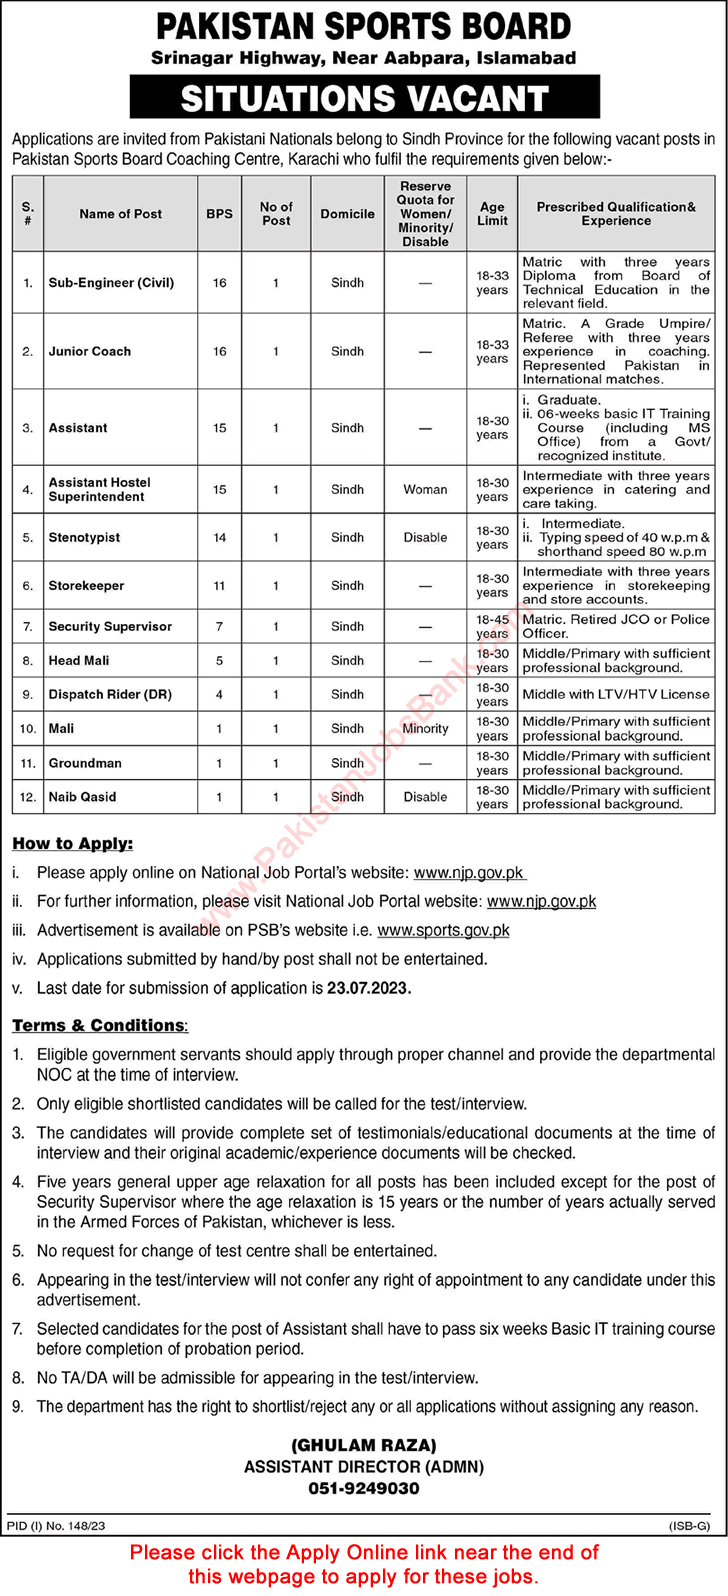 Pakistan Sports Board Coaching Center Karachi Jobs 2023 July PSB Apply Online Sub Engineers, Assistants & Others Latest